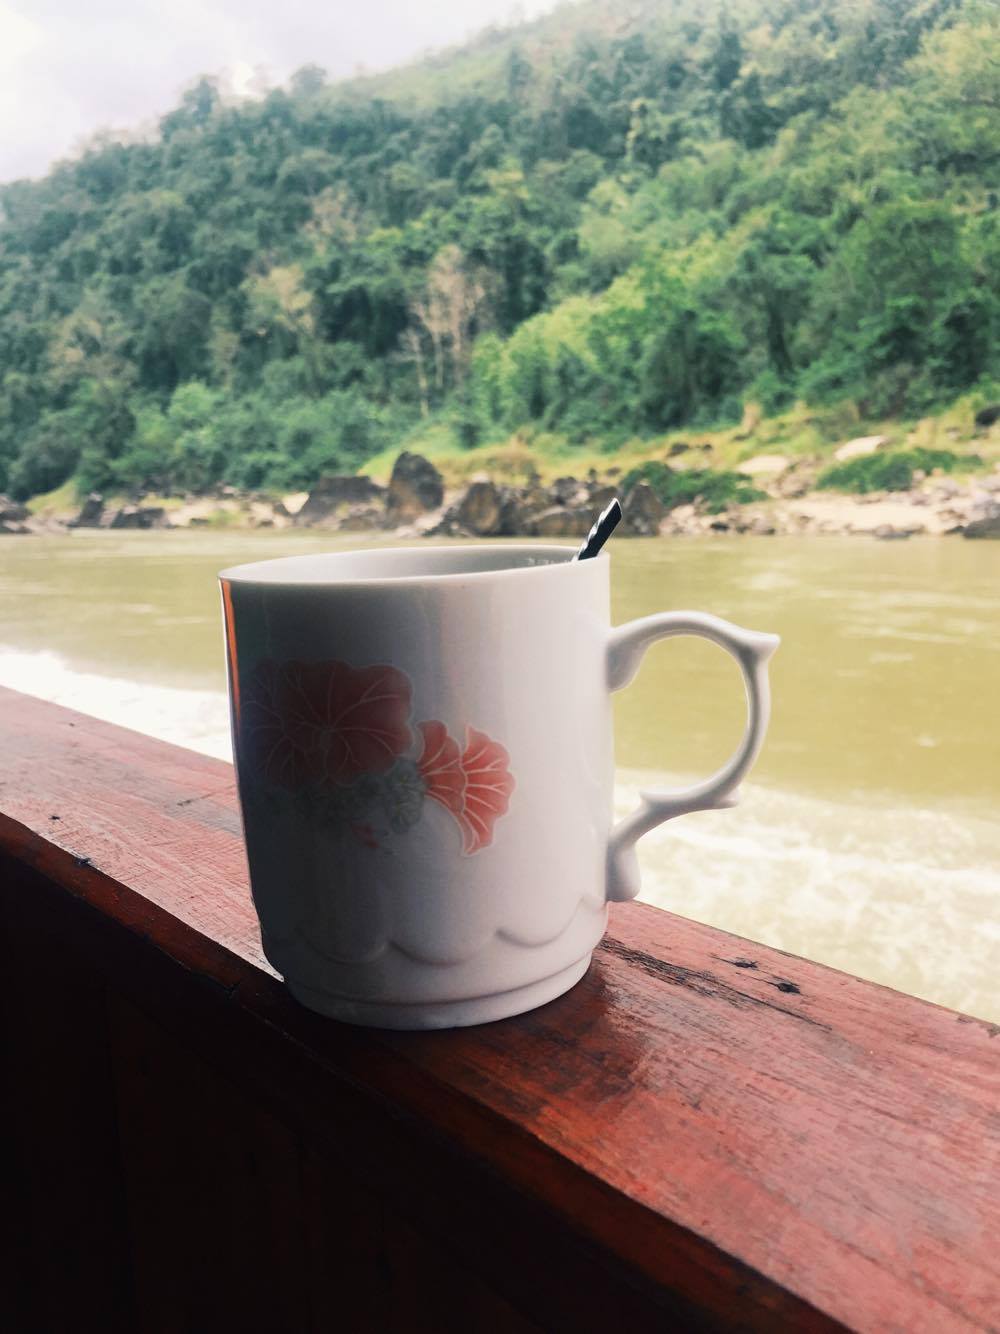 Coffee served in a mug onboard the slow boat from laos to thailand 